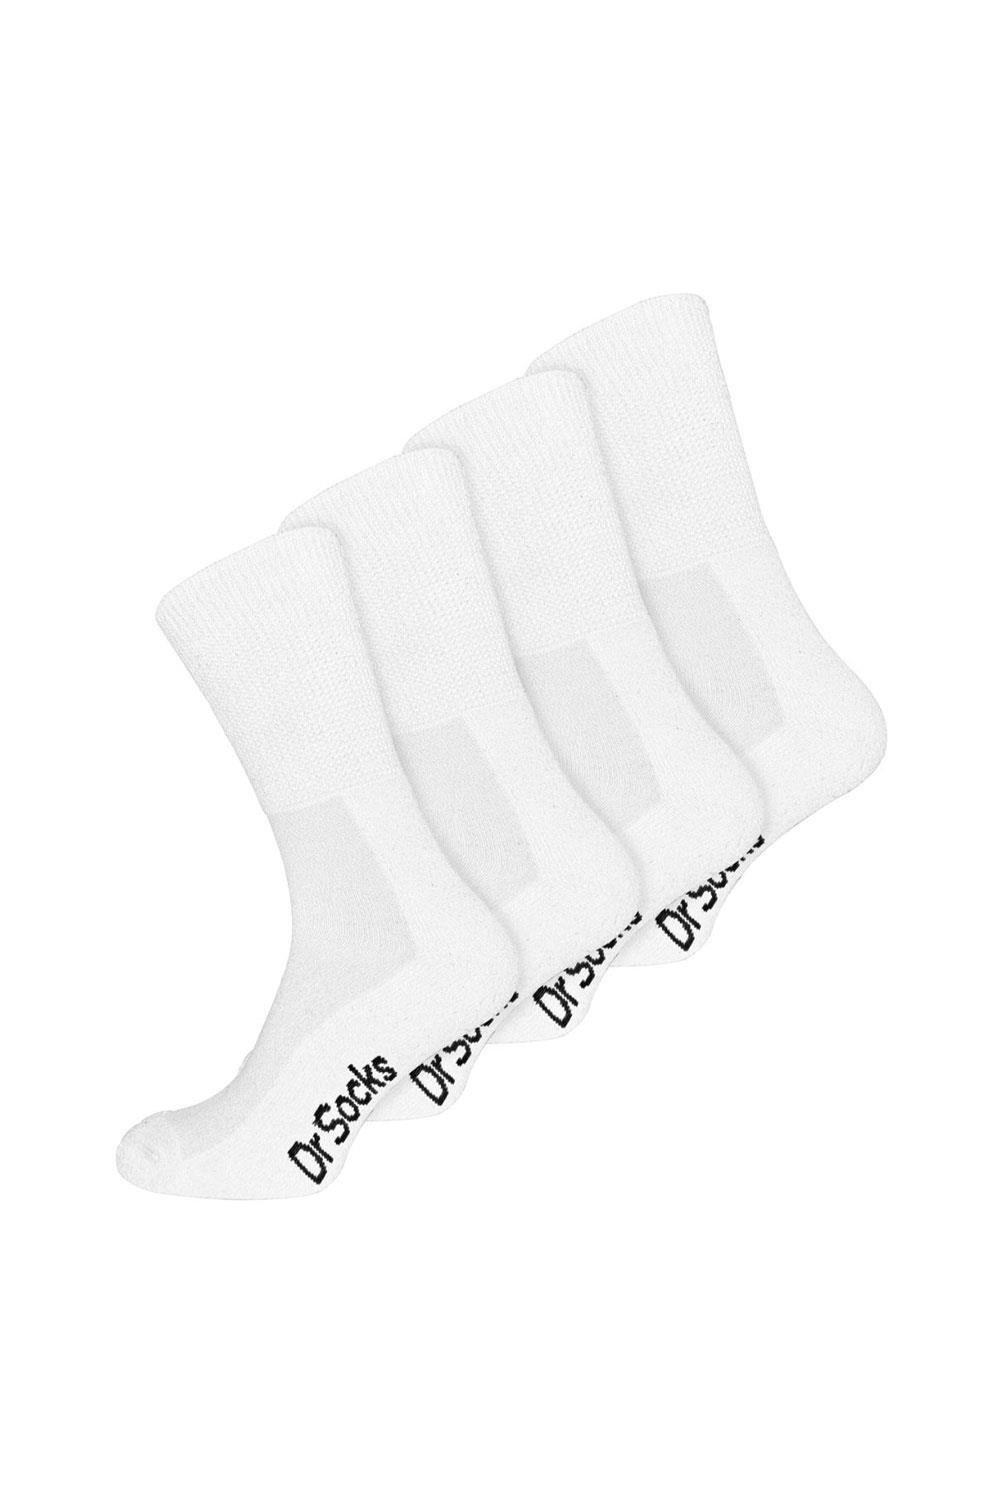 4 Pair Extra Wide Bamboo Diabetic Non Elastic Socks for Swollen Feet